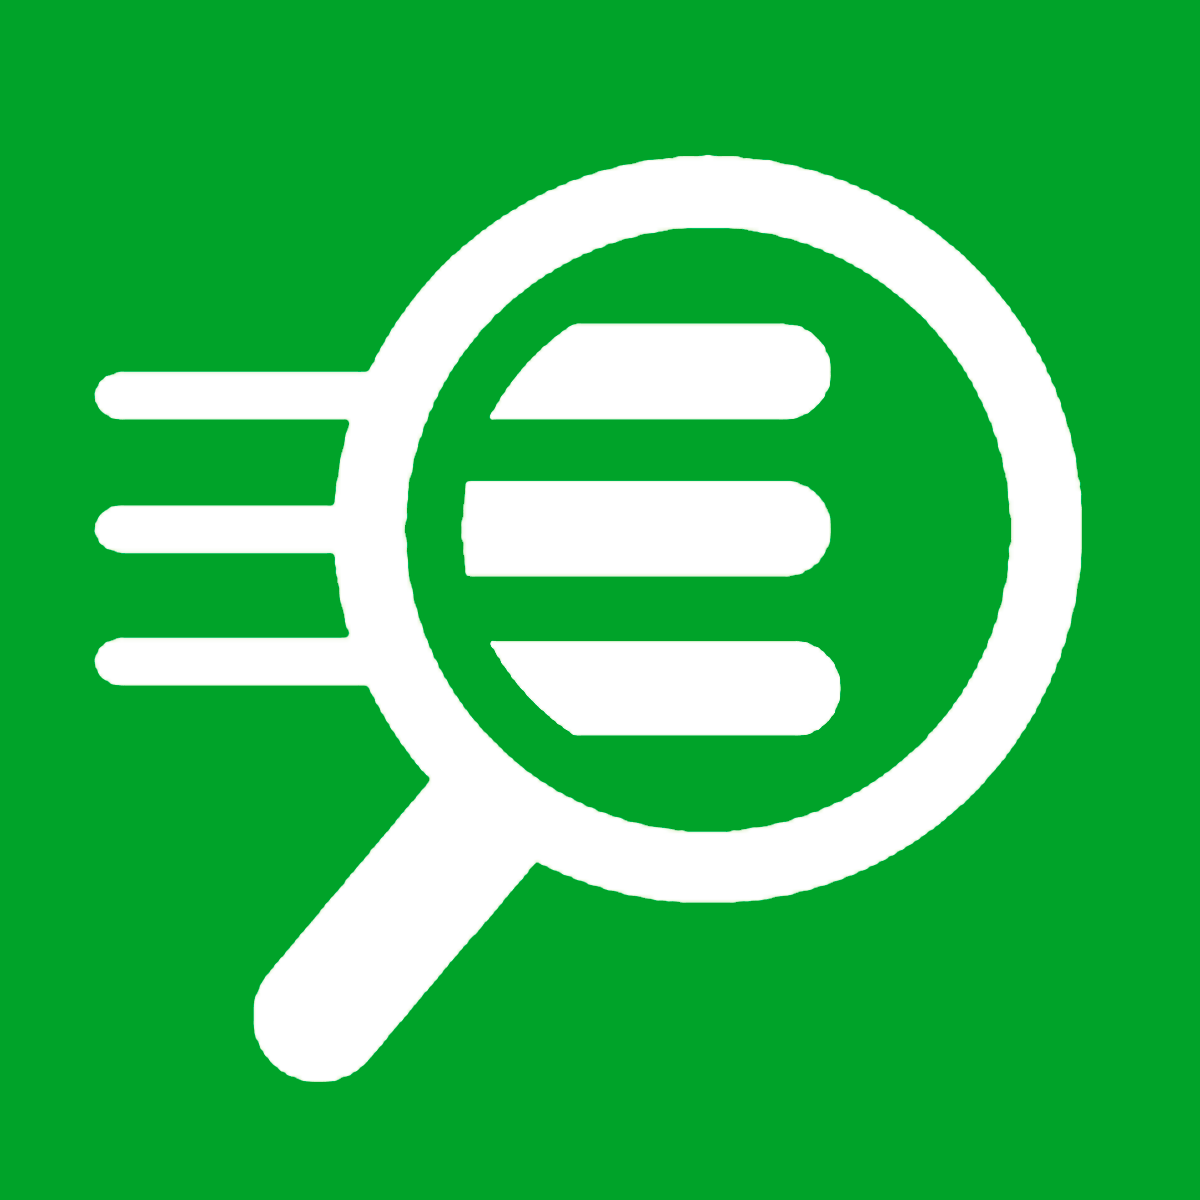 Searchify Live Search & Filter